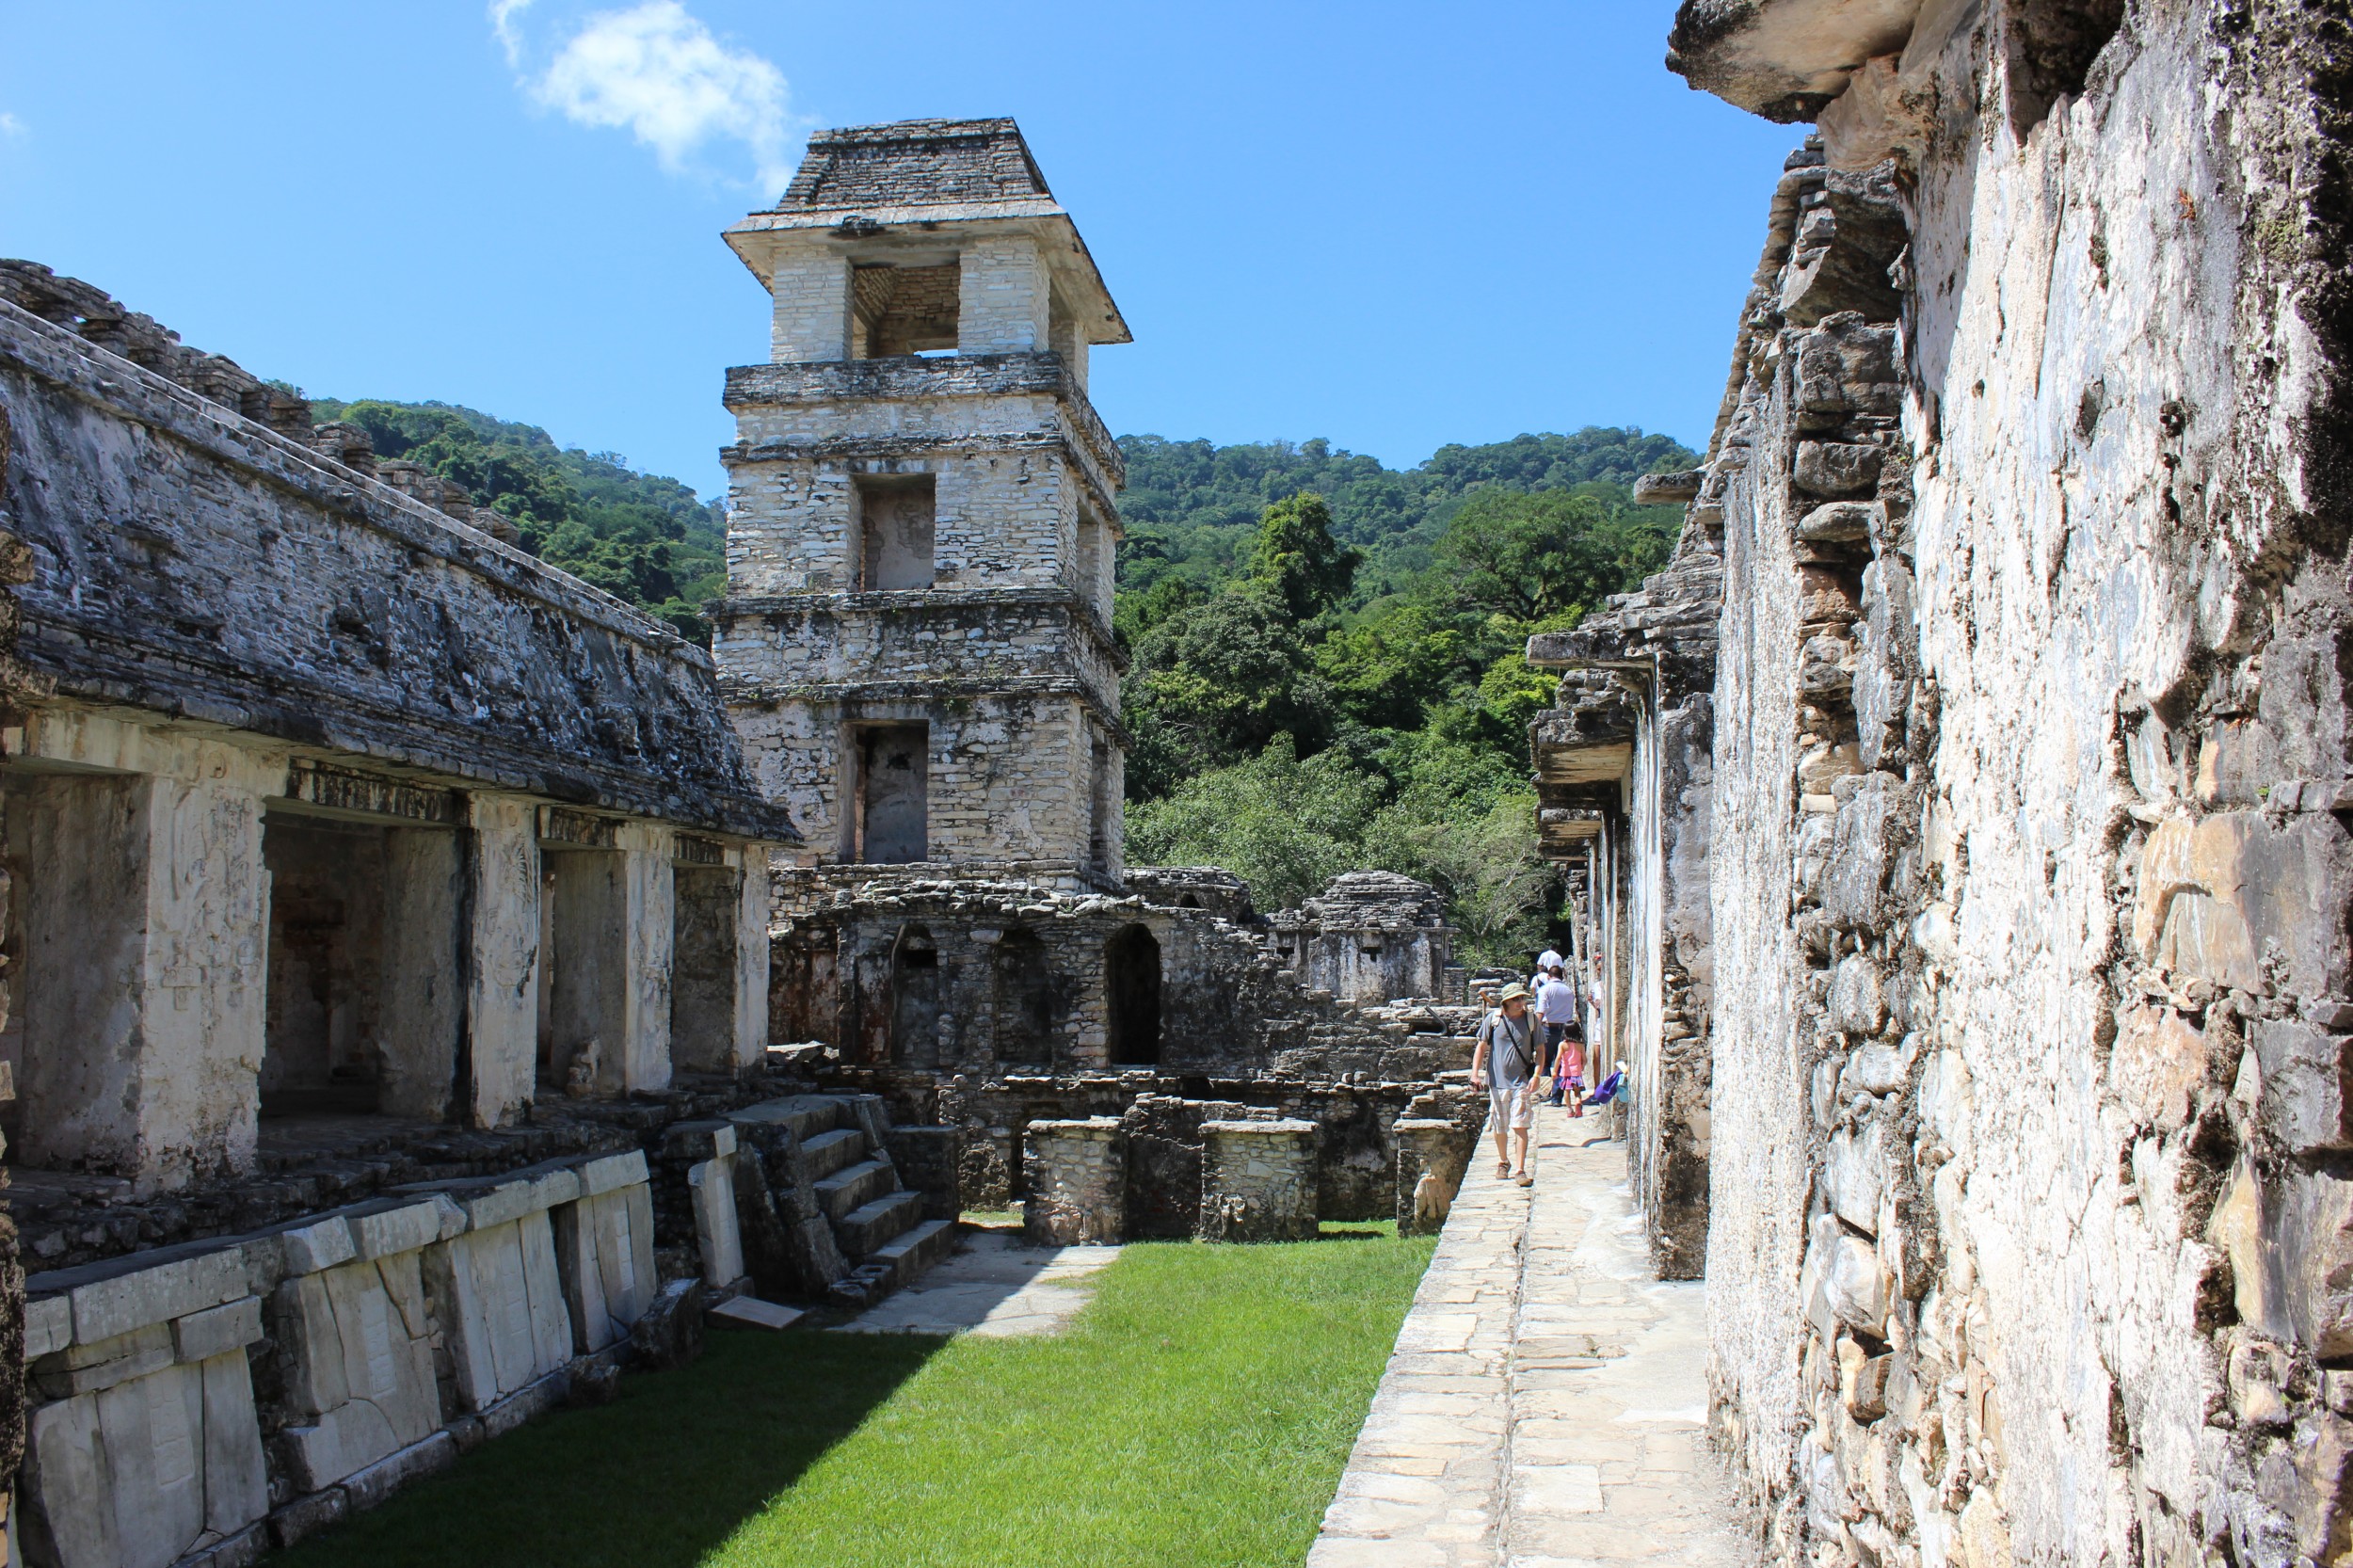 Running around, in and through the ruins of Palenque. 